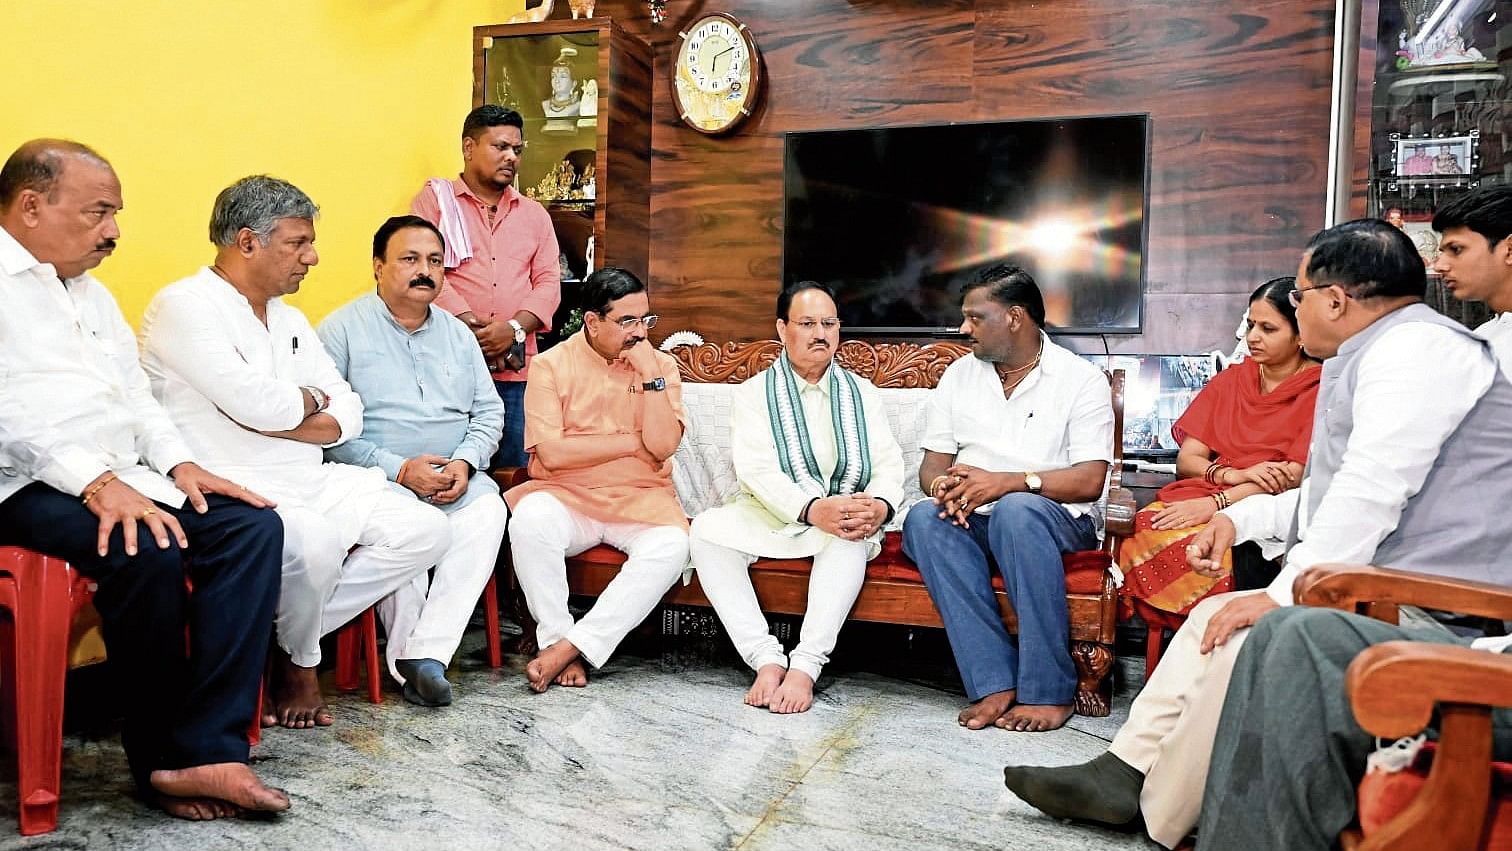 BJP national president J P Nadda speaks to the family members of Neha Hiremath, who was murdered on the premises of a Hubballi college, on Sunday. Union minister Pralhad Joshi, BJP lawmakers Arvind Bellad and Mahesh Tenginkayi look on. DH Photo